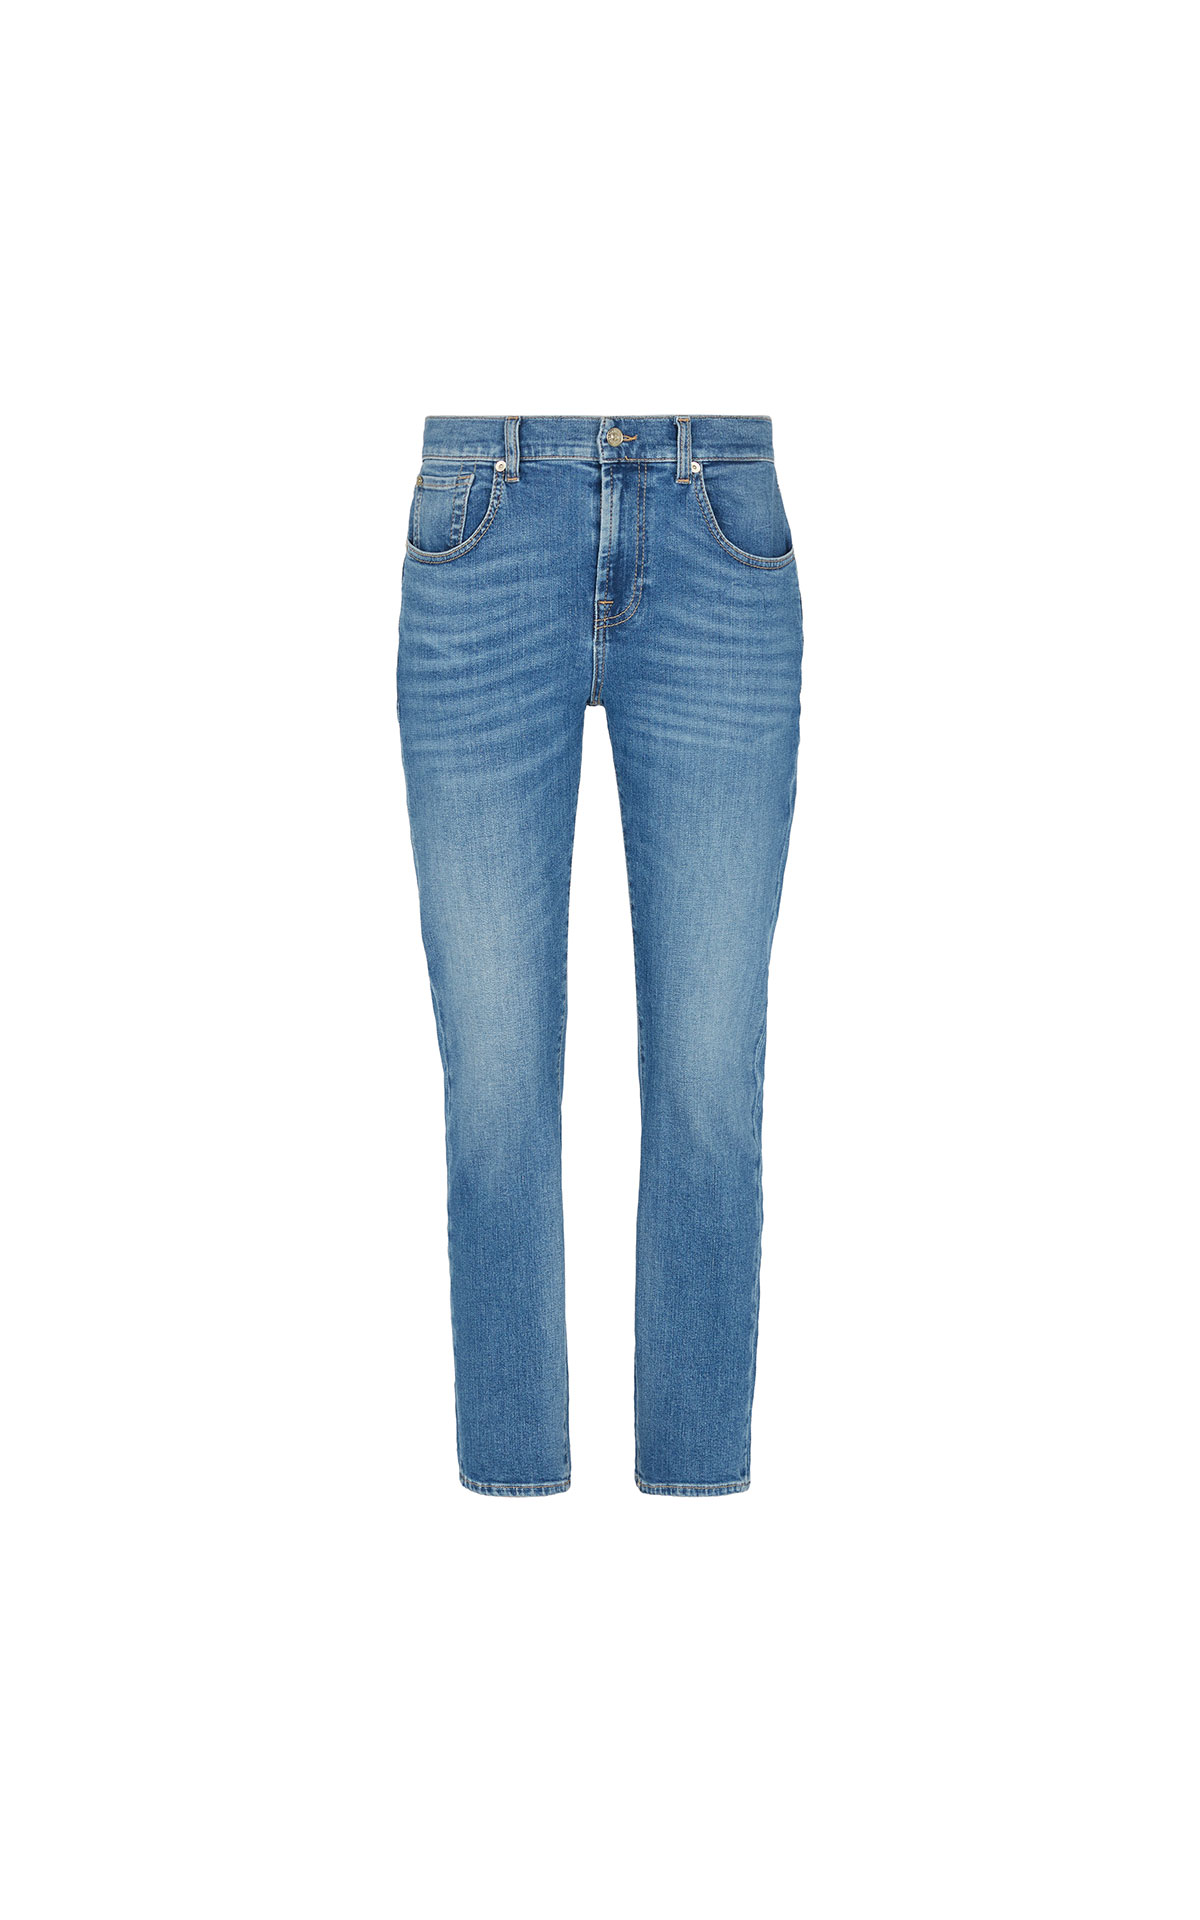 7 For all Mankind Relaxed skinny  from Bicester Village